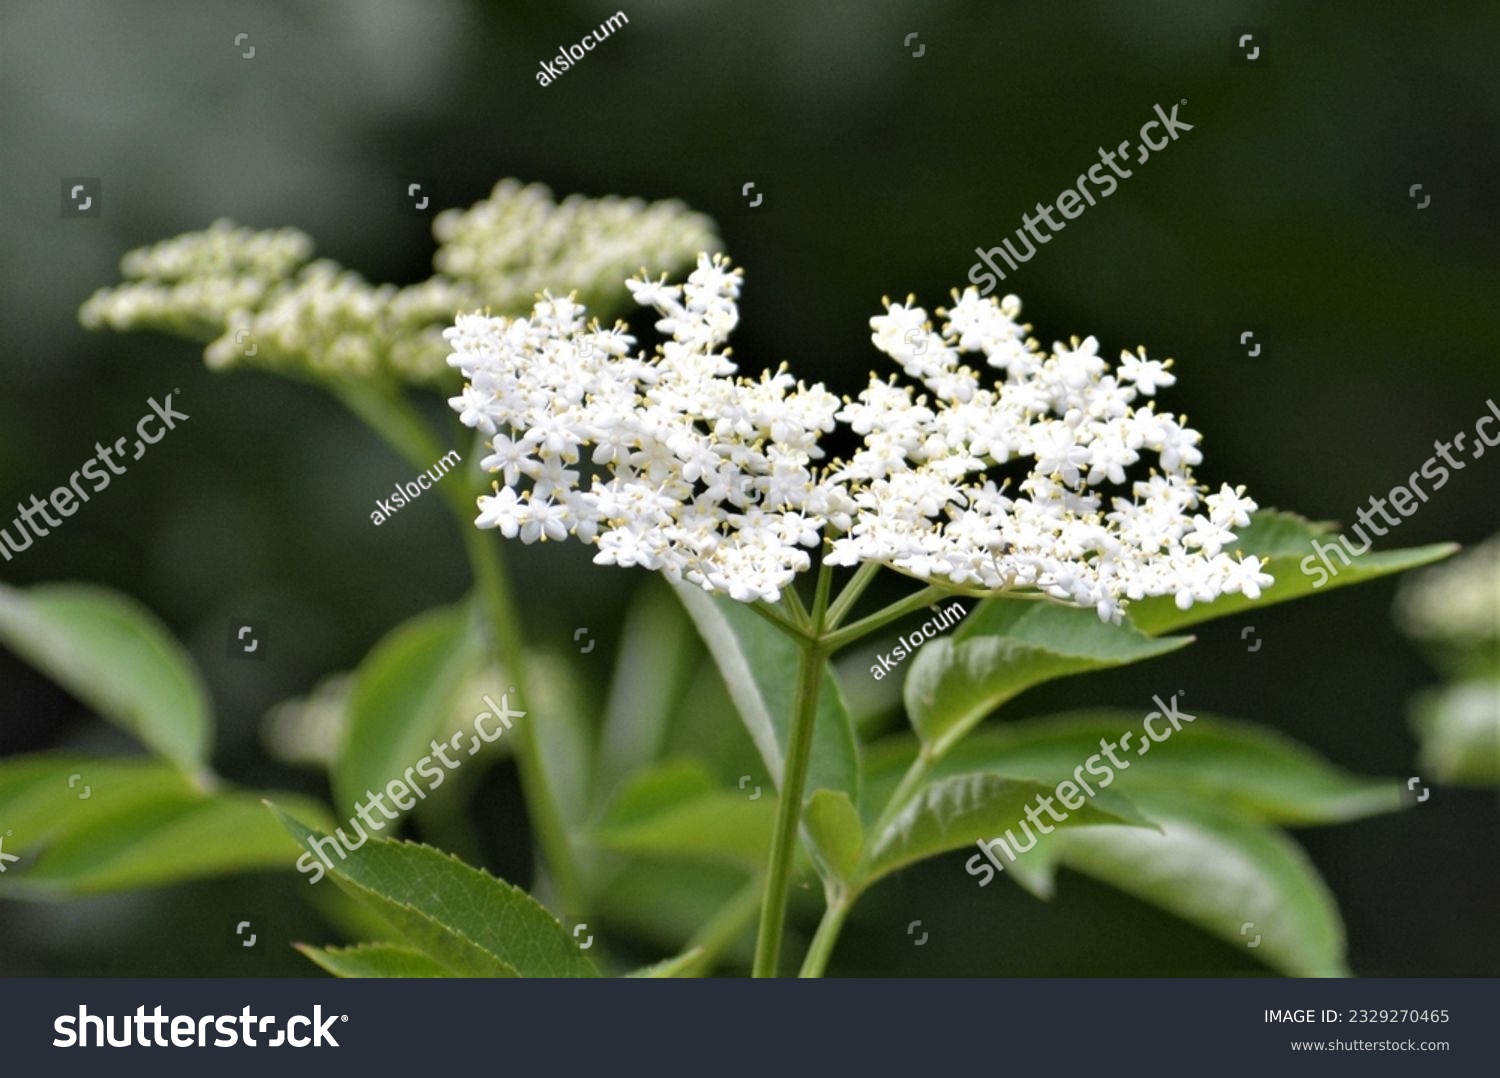 Conium maculatum, colloquially known as hemlock, poison hemlock or wild hemlock, is a highly poisonous biennial herbaceous flowering plant in the carrot family Apiaceae #2329270465